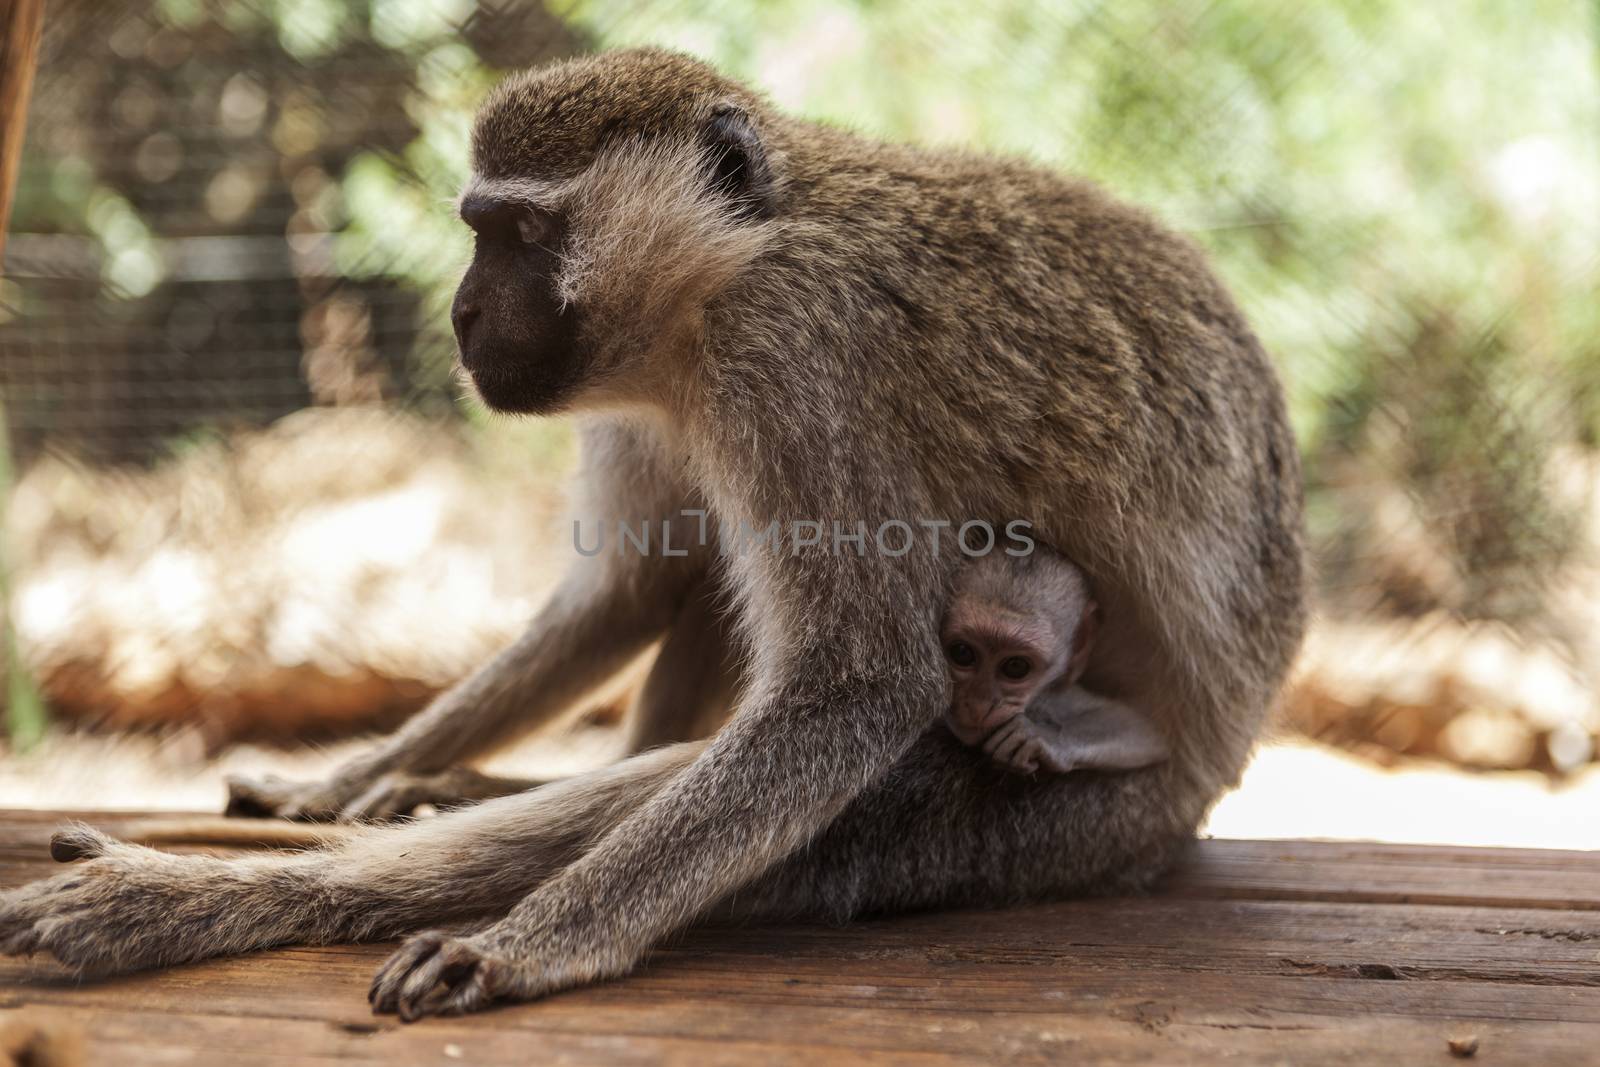 The Monkey Mother by orcearo